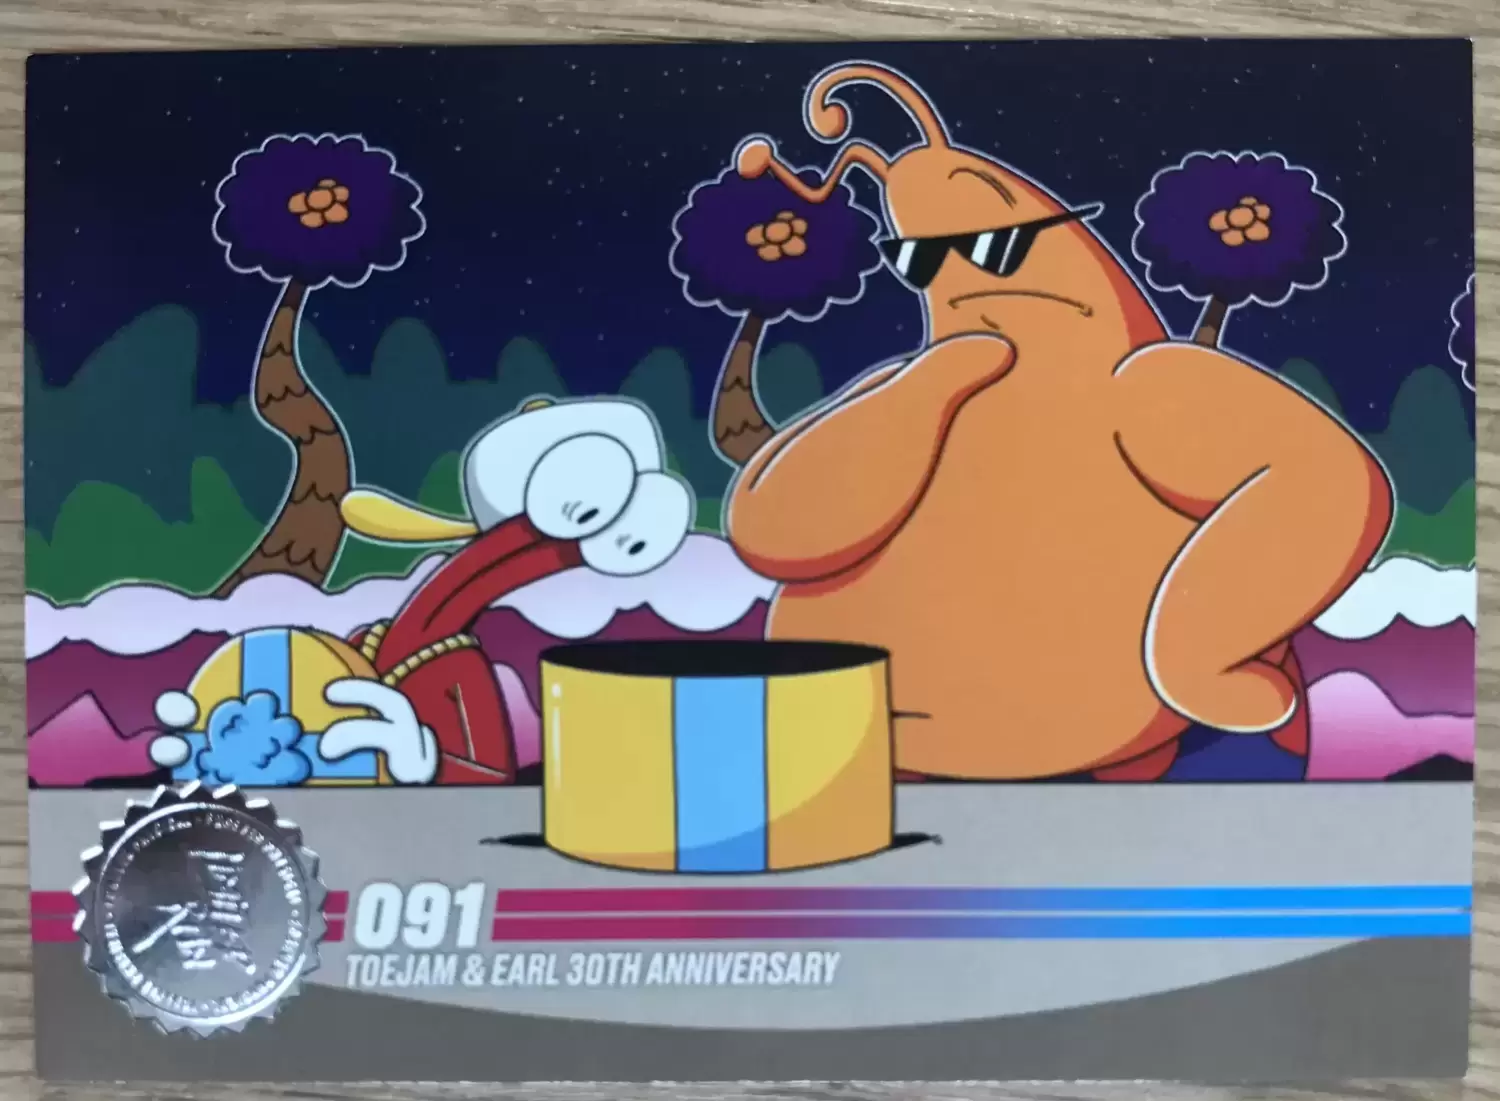 Limited Run Cards Series 3 - Toejam and Earl Card Pack